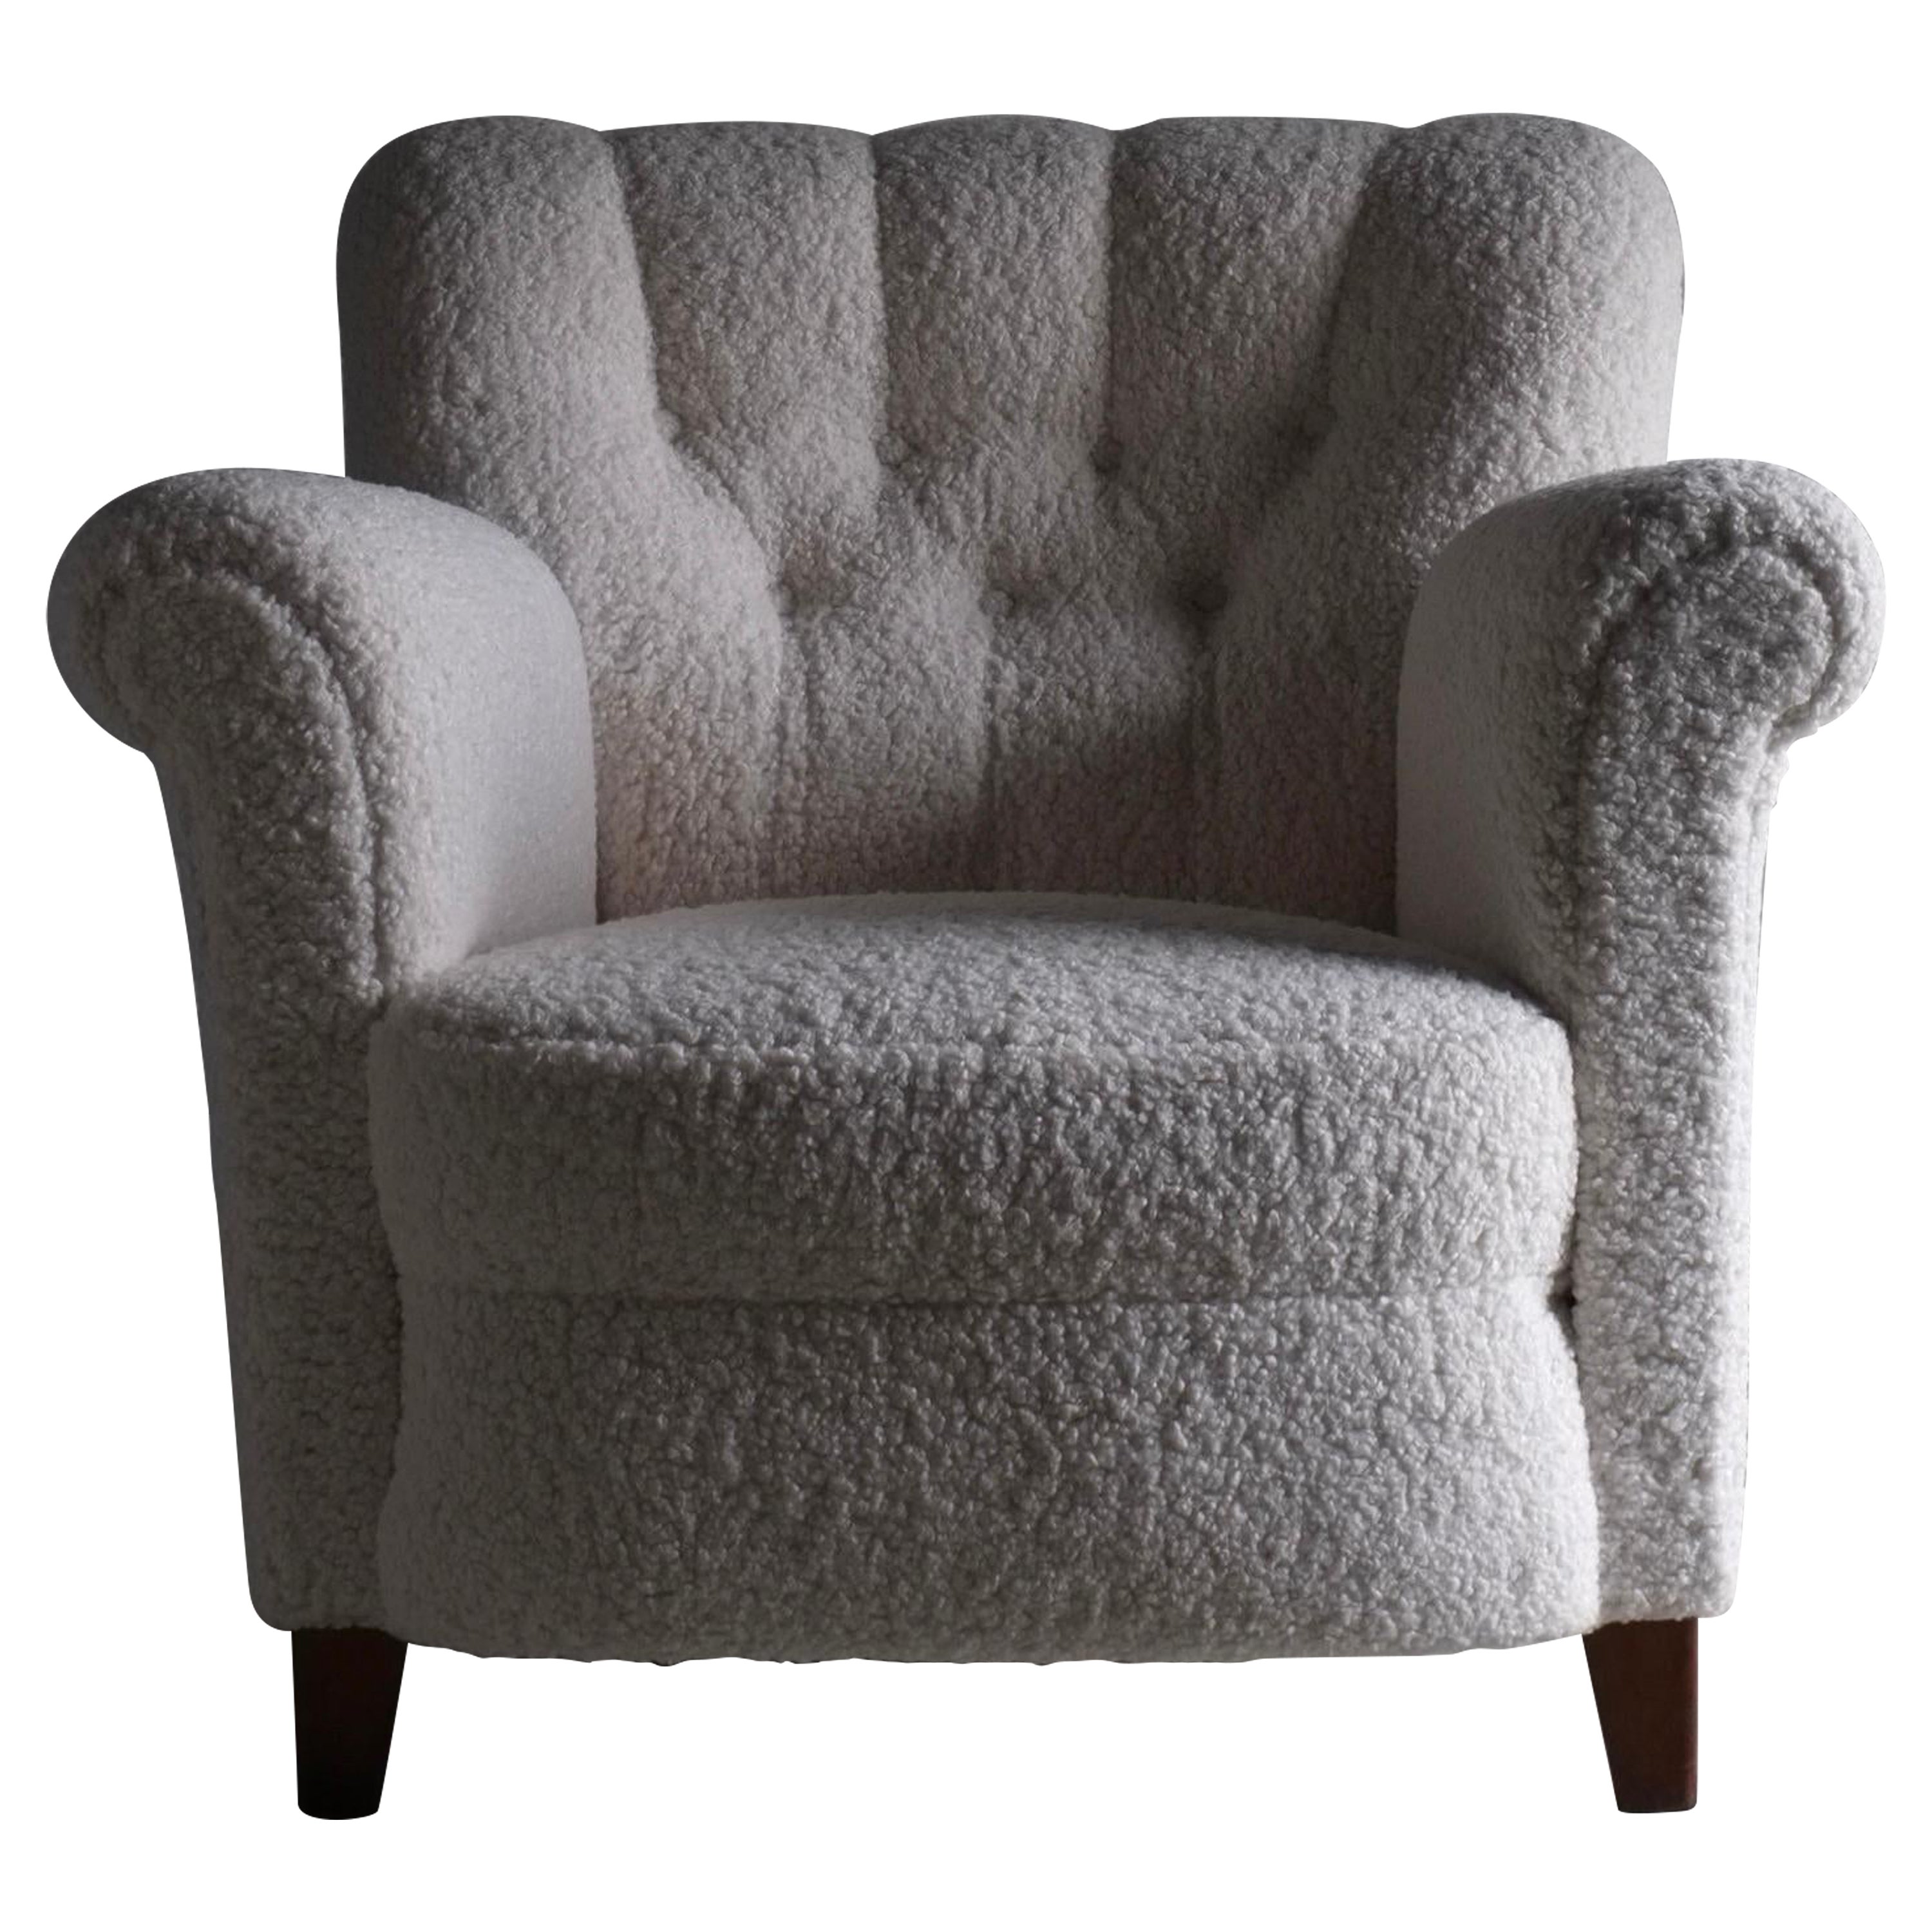 White Faux Shearling Lounge Chair, Sweden 1940s For Sale